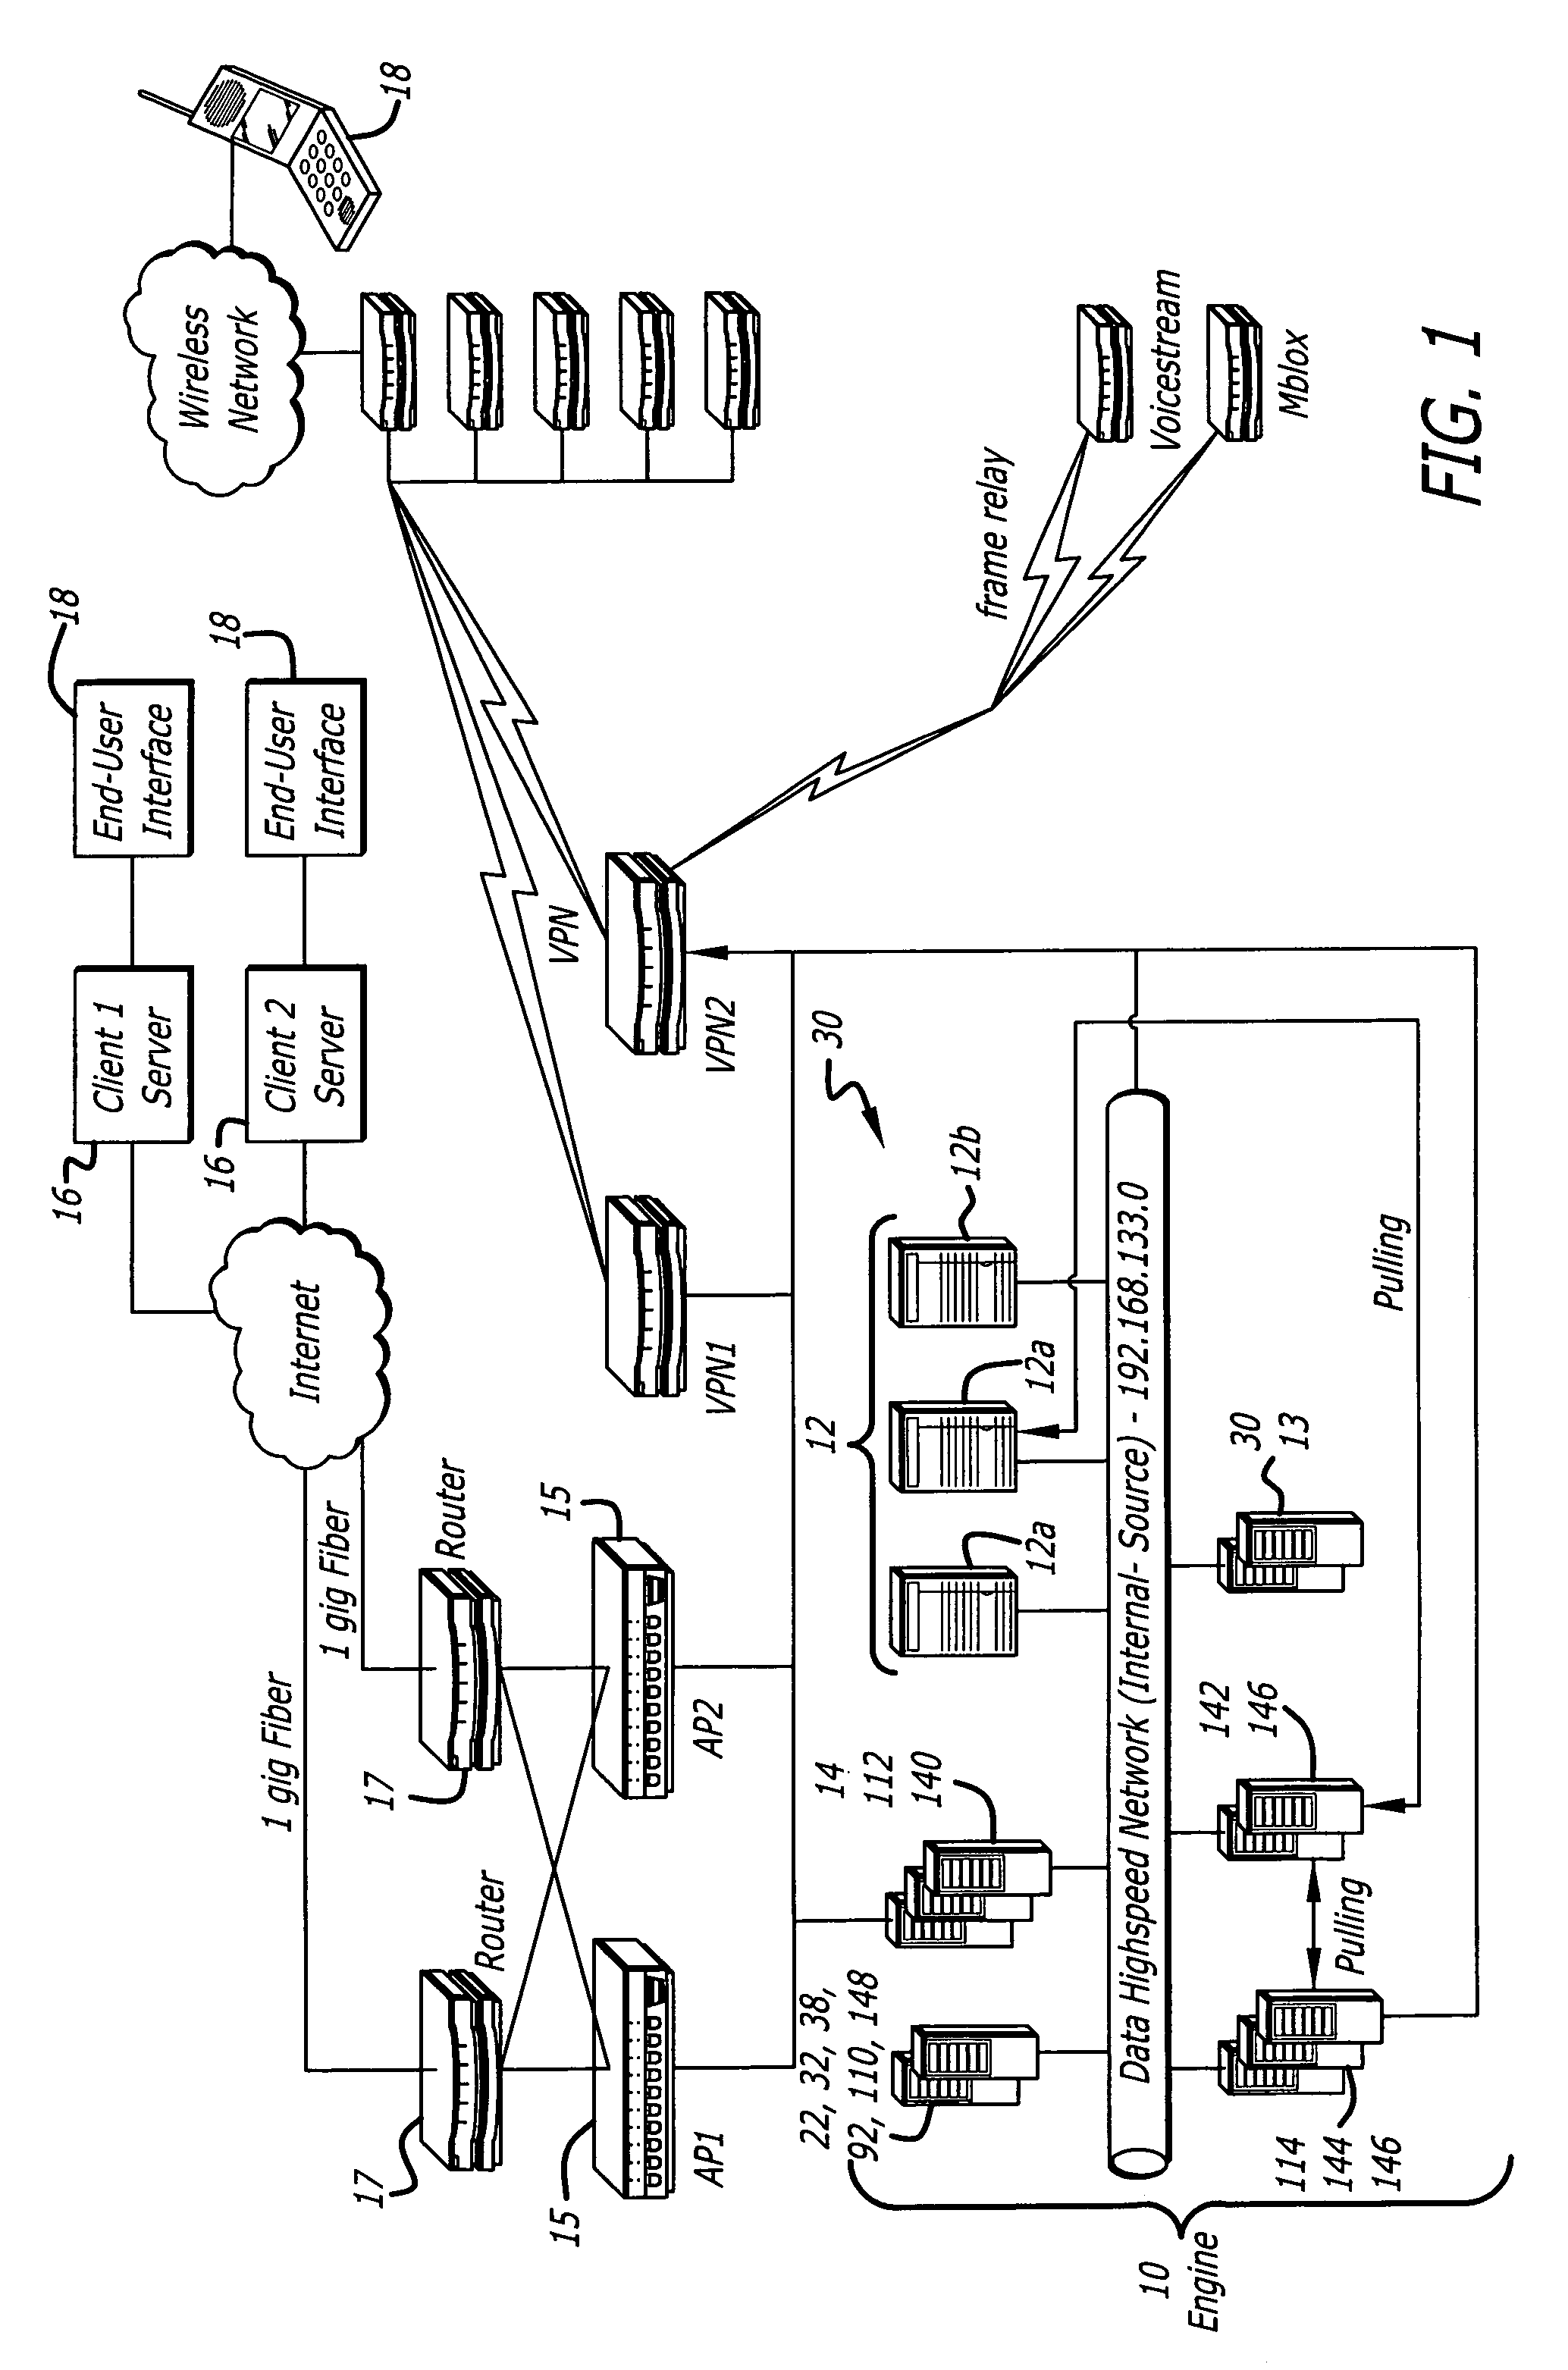 System for supporting production, management and delivery of media content for wireless devices